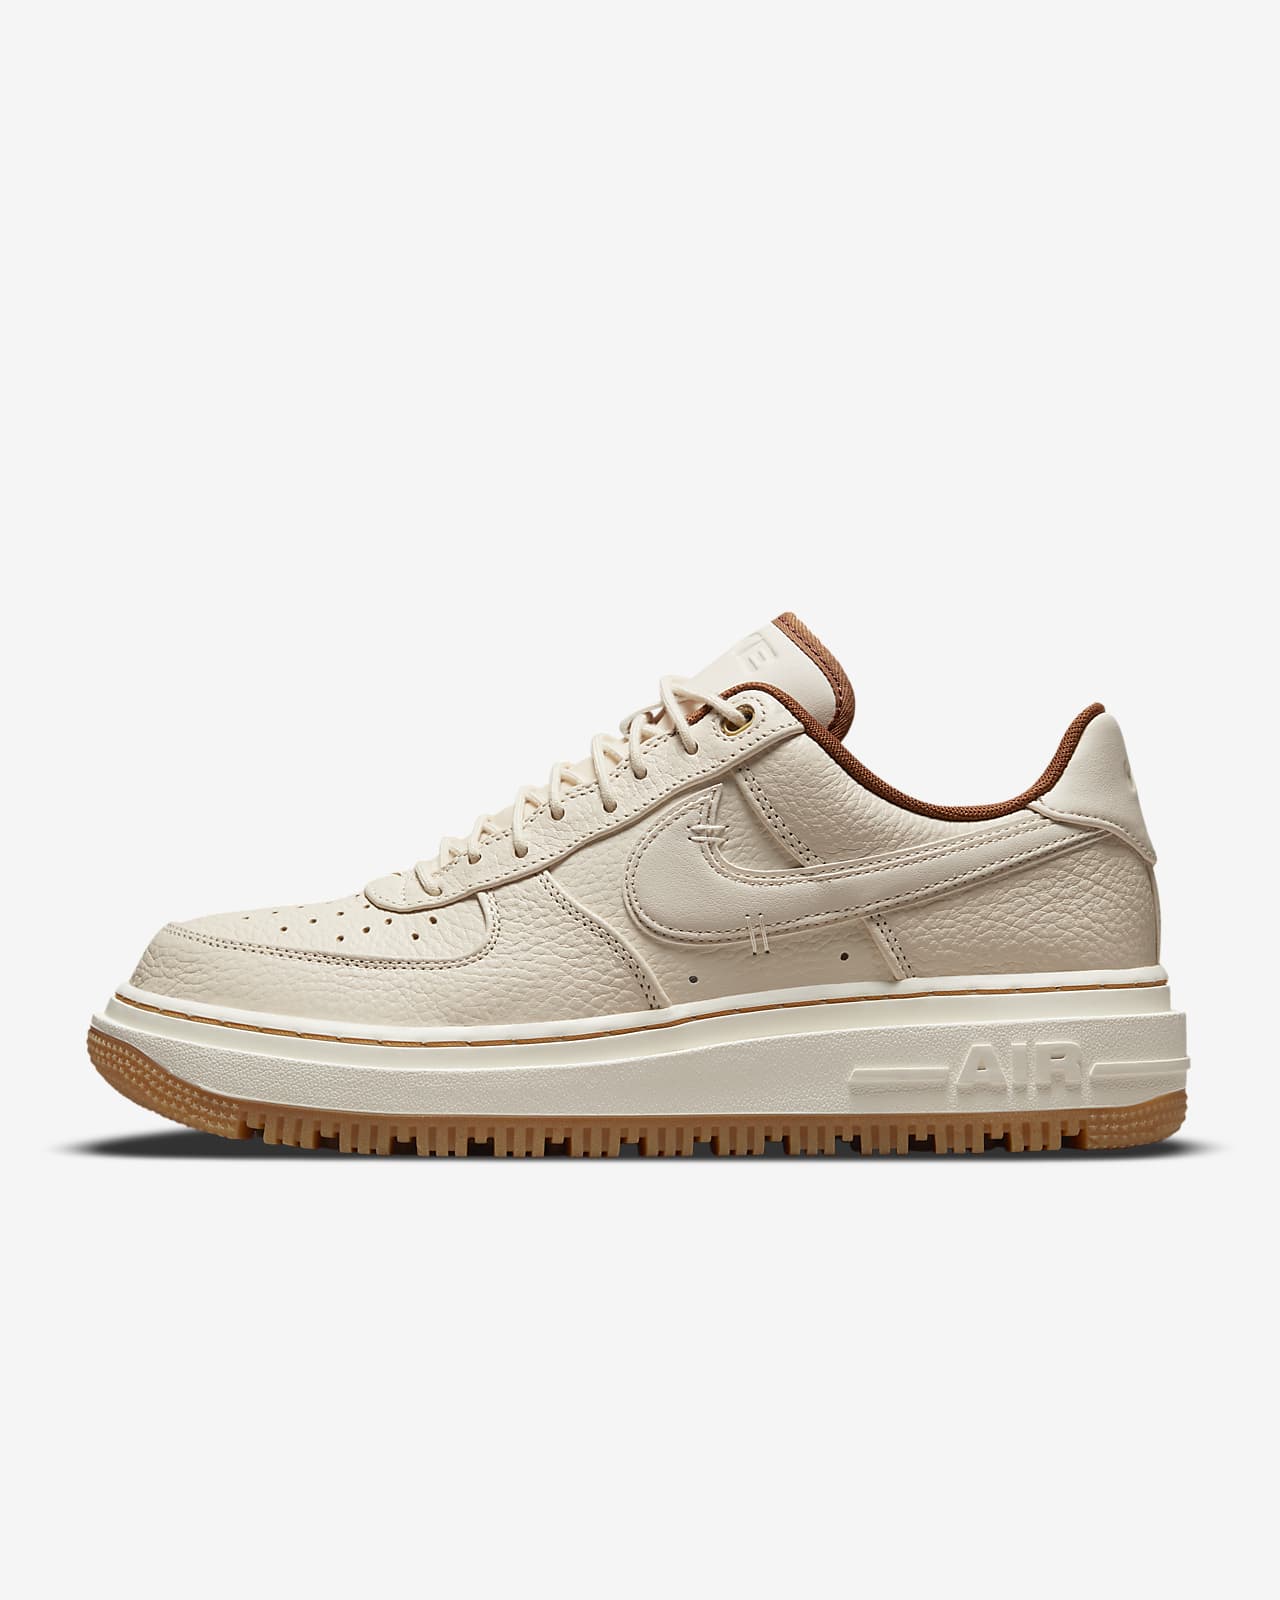 nike air force 1 mens trainers